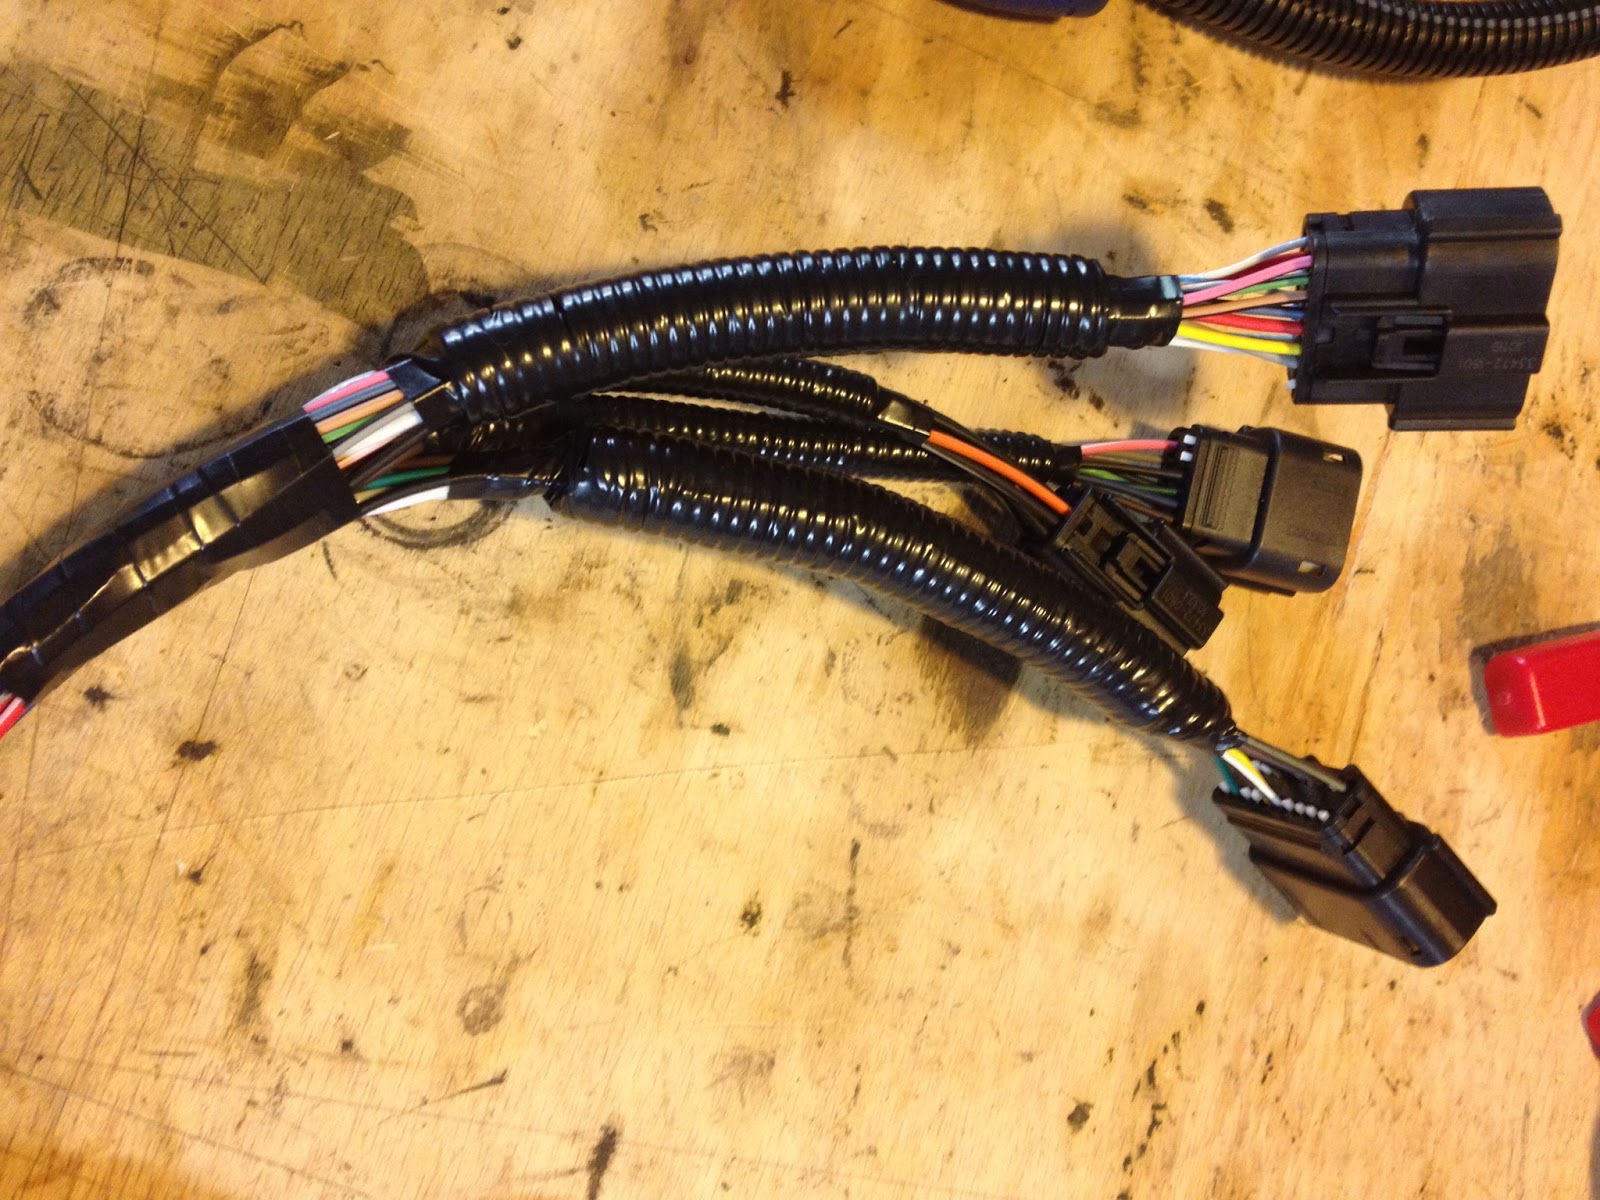 optimal tour: How to build a wiring harness that will last